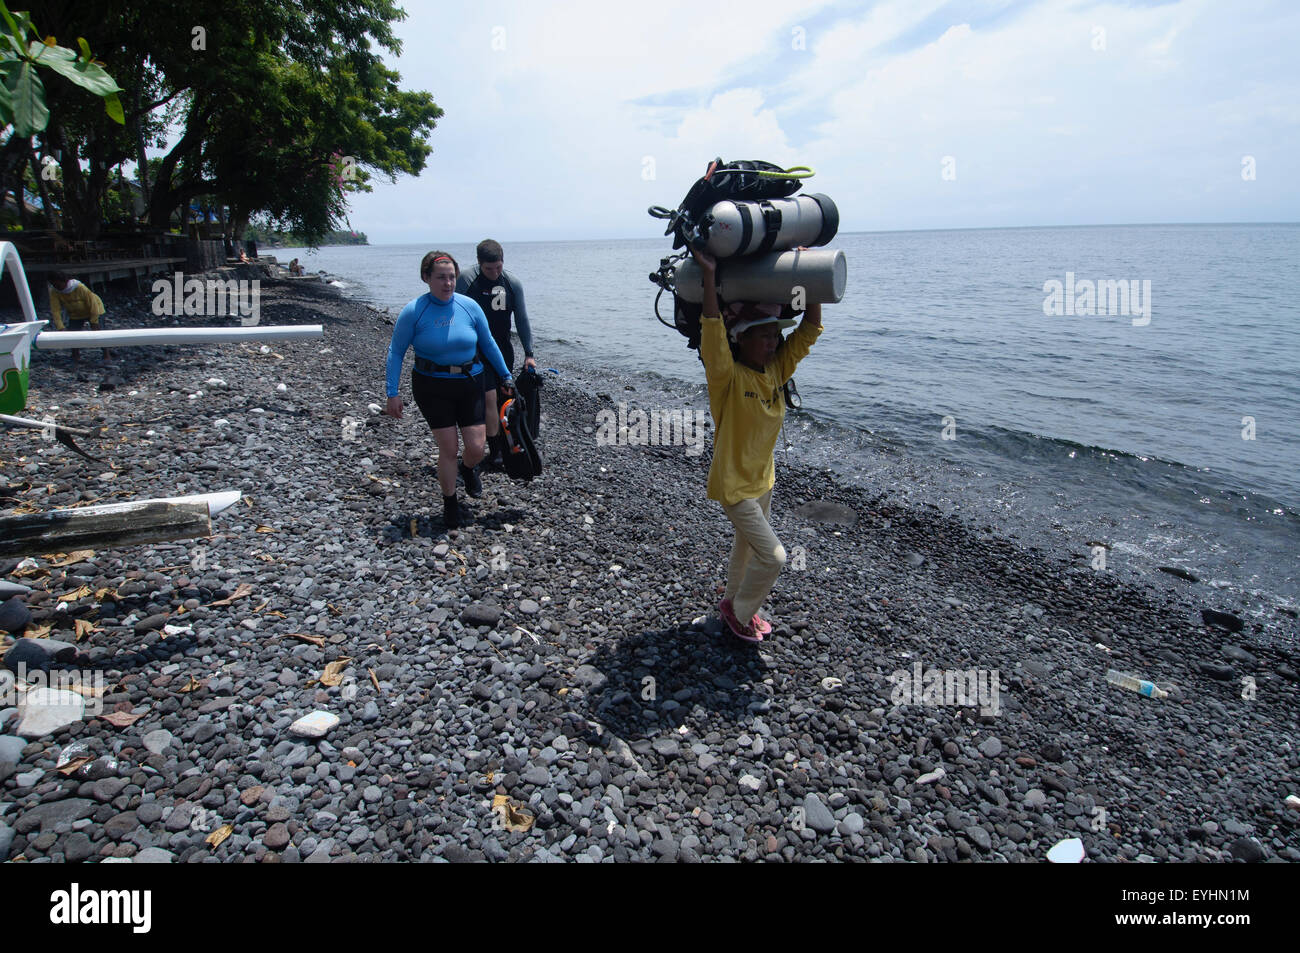 A female porter carries two fully loaded scuba tanks on her head along a rocky beach while the divers follow along, Tulamben Stock Photo